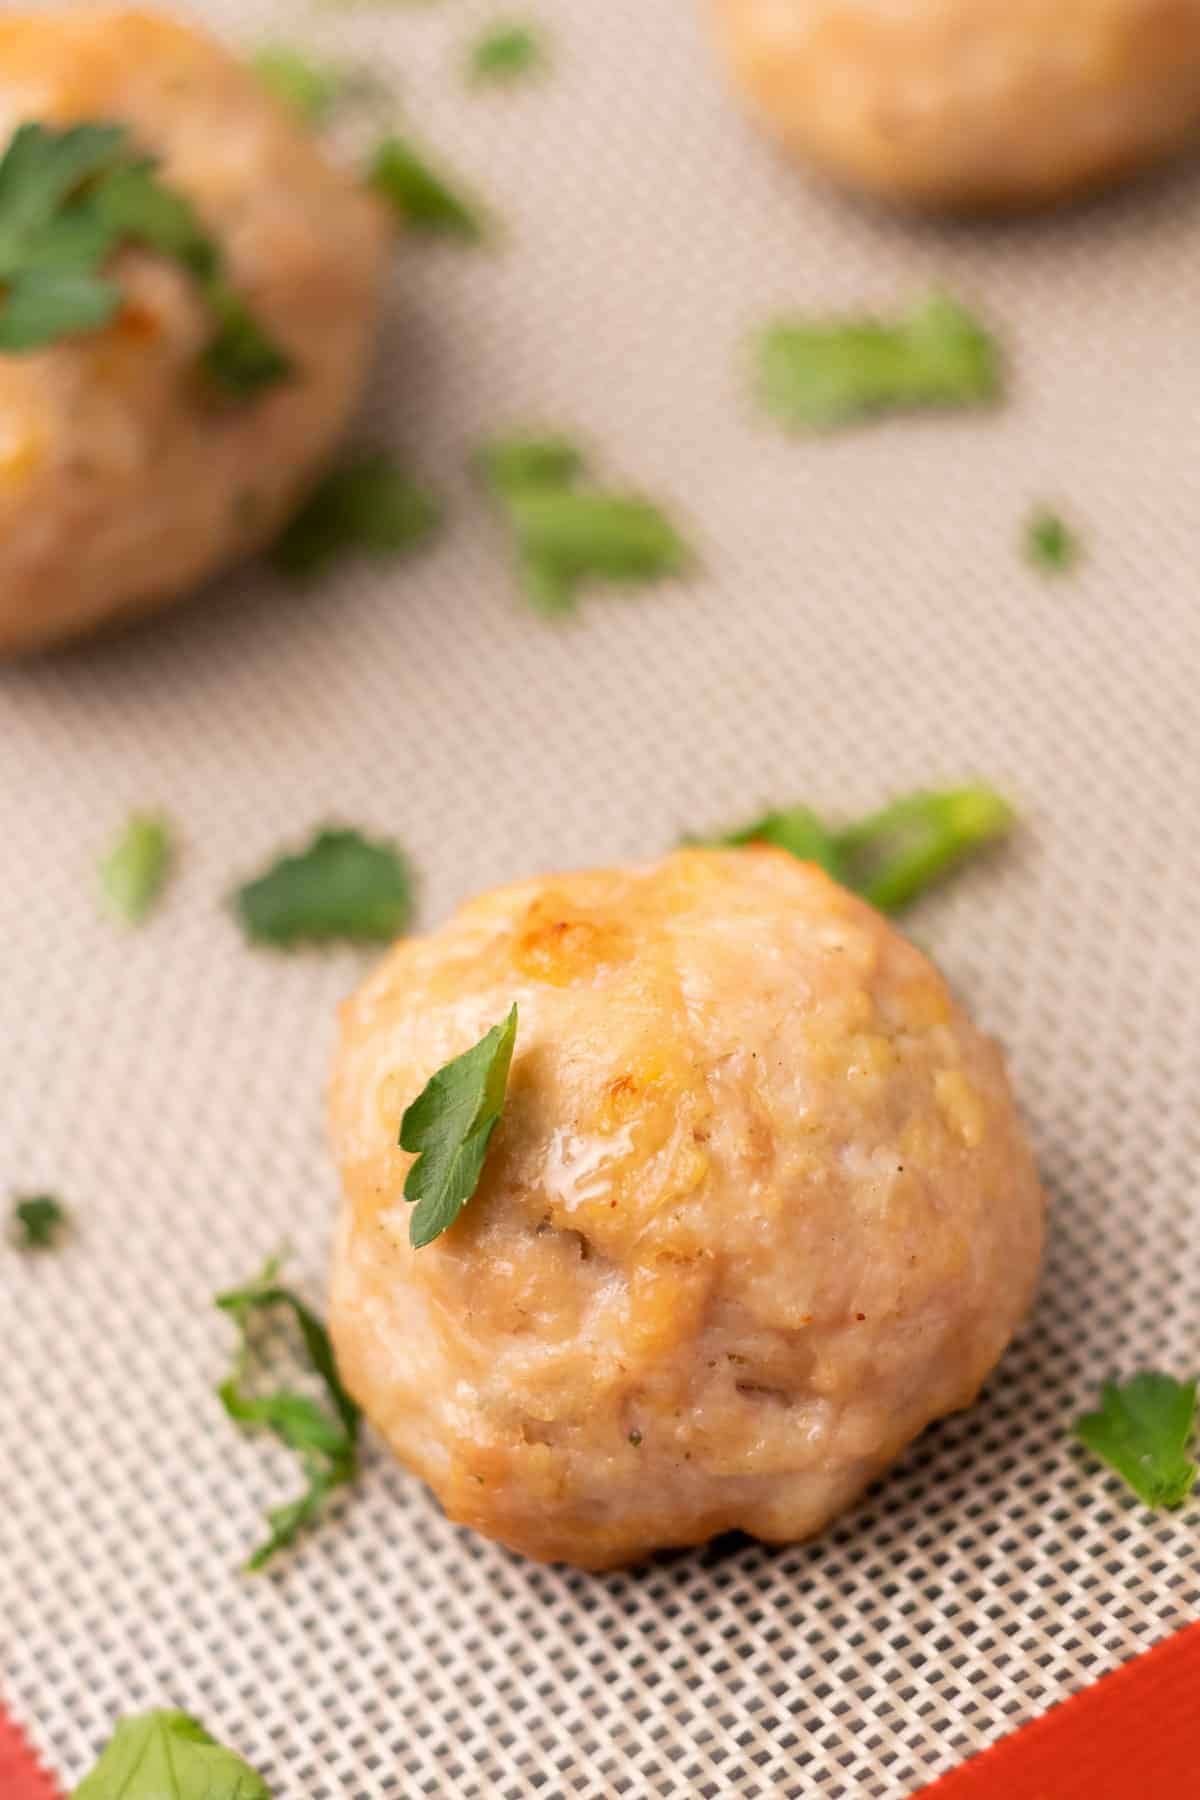 Close-up of meatball on the baking tray, garnished with parsley